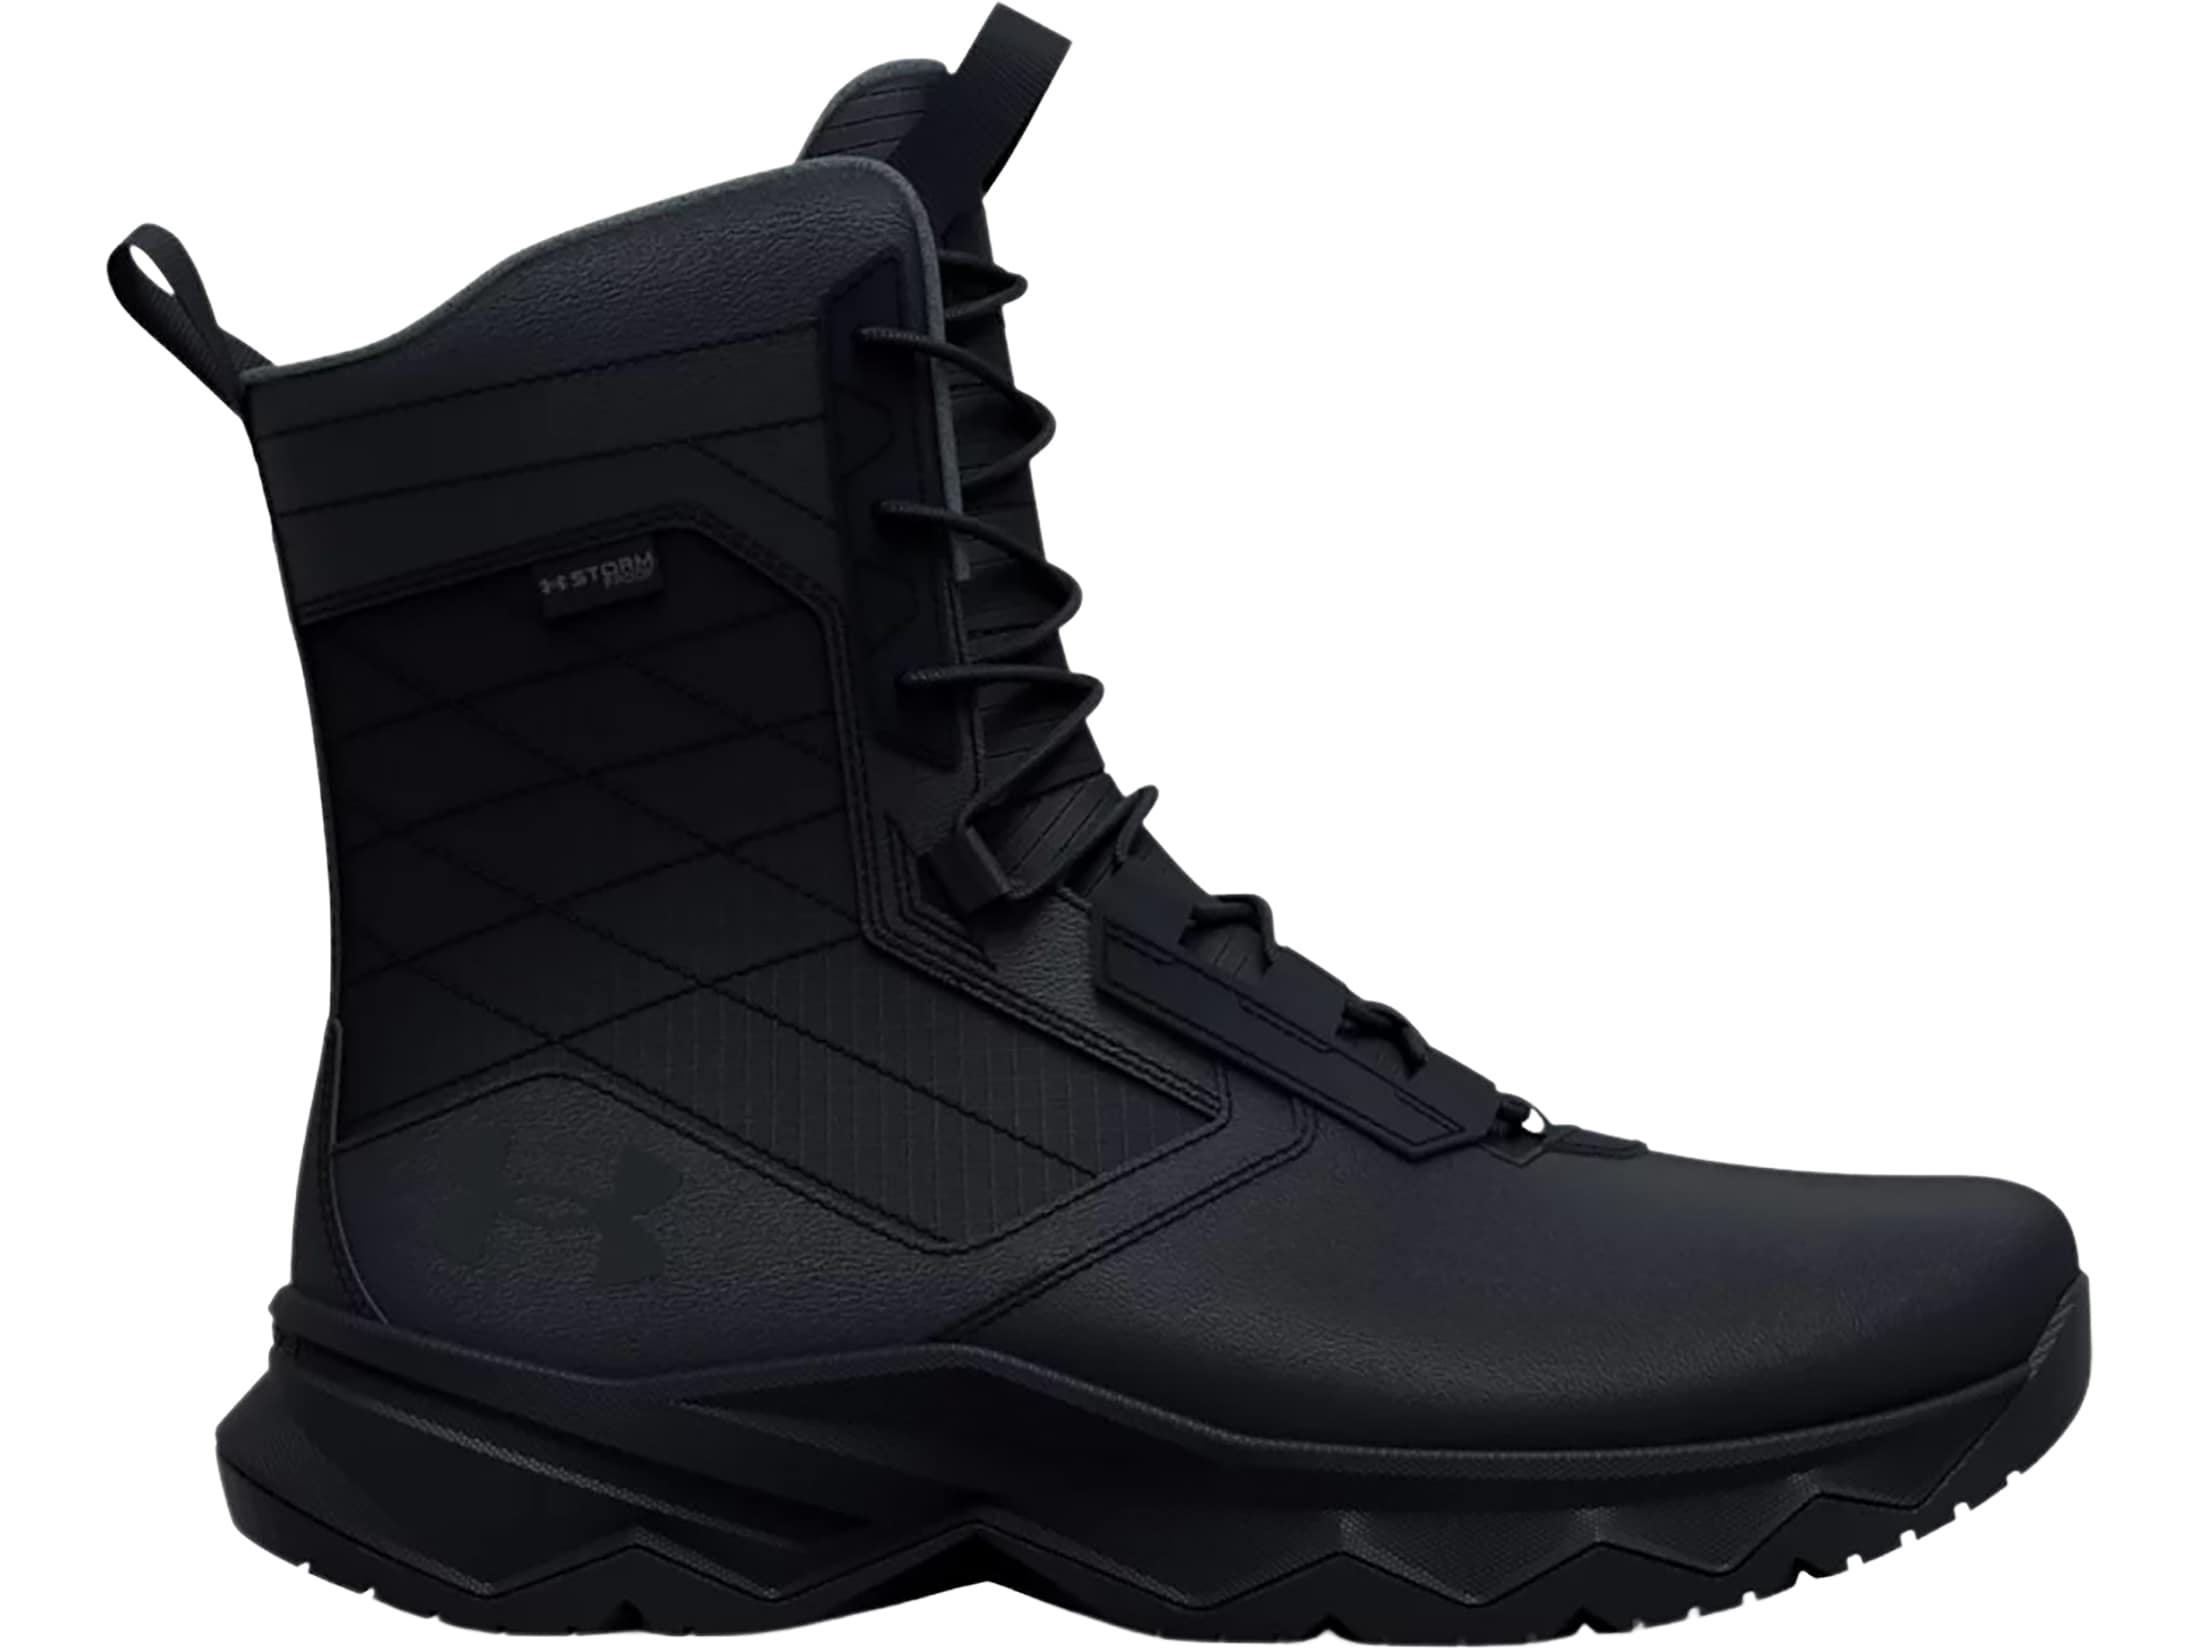 Under Armour Stellar G2 Waterproof Tactical Boots Leather Black Men's